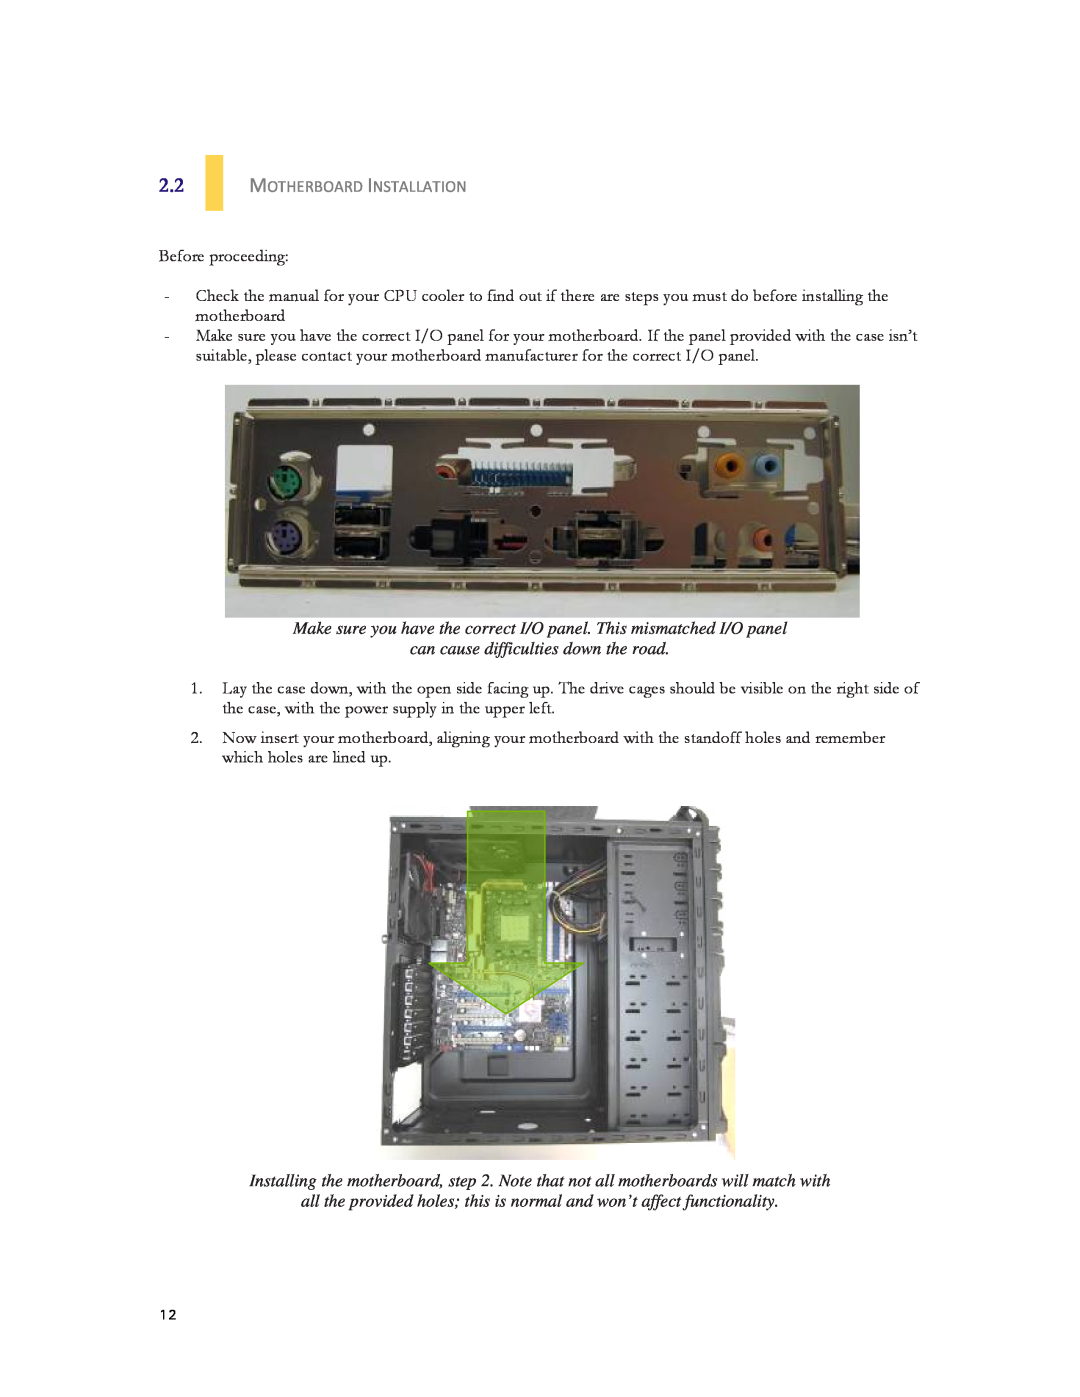 Antec DF-30 user manual Motherboard Installation, Before proceeding, can cause difficulties down the road 